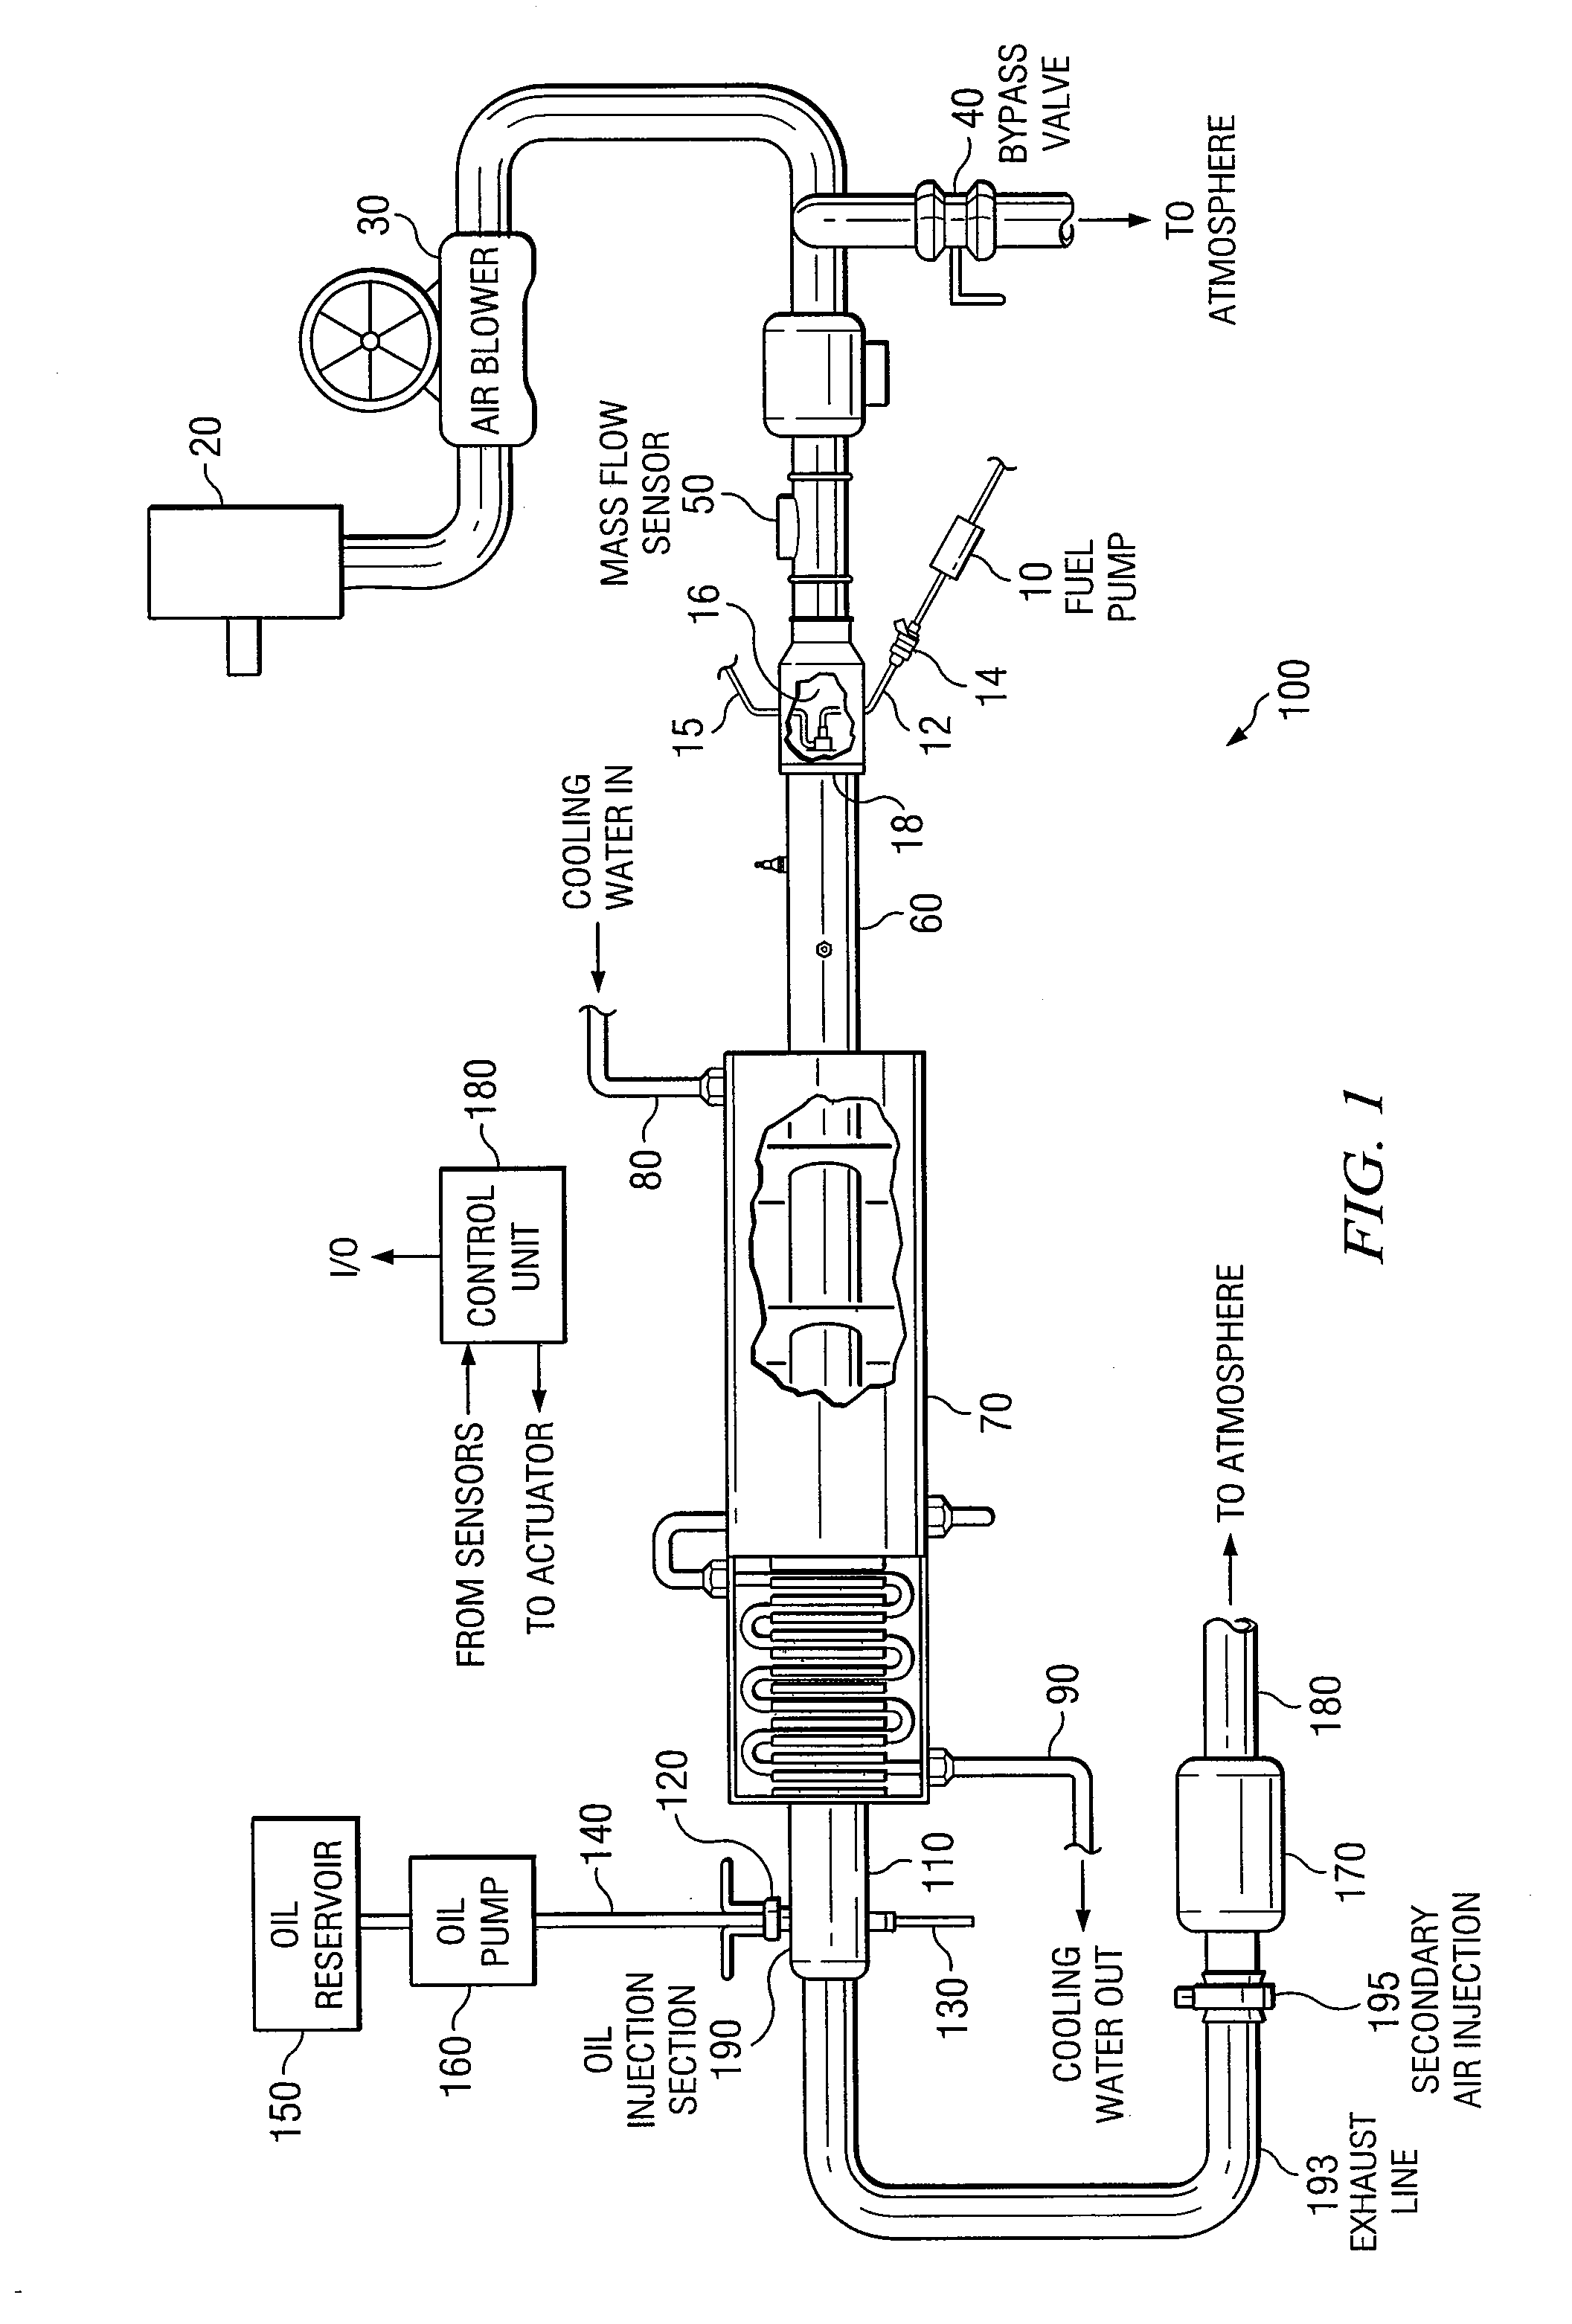 Secondary Air Injector For Use With Exhaust Gas Simulation System